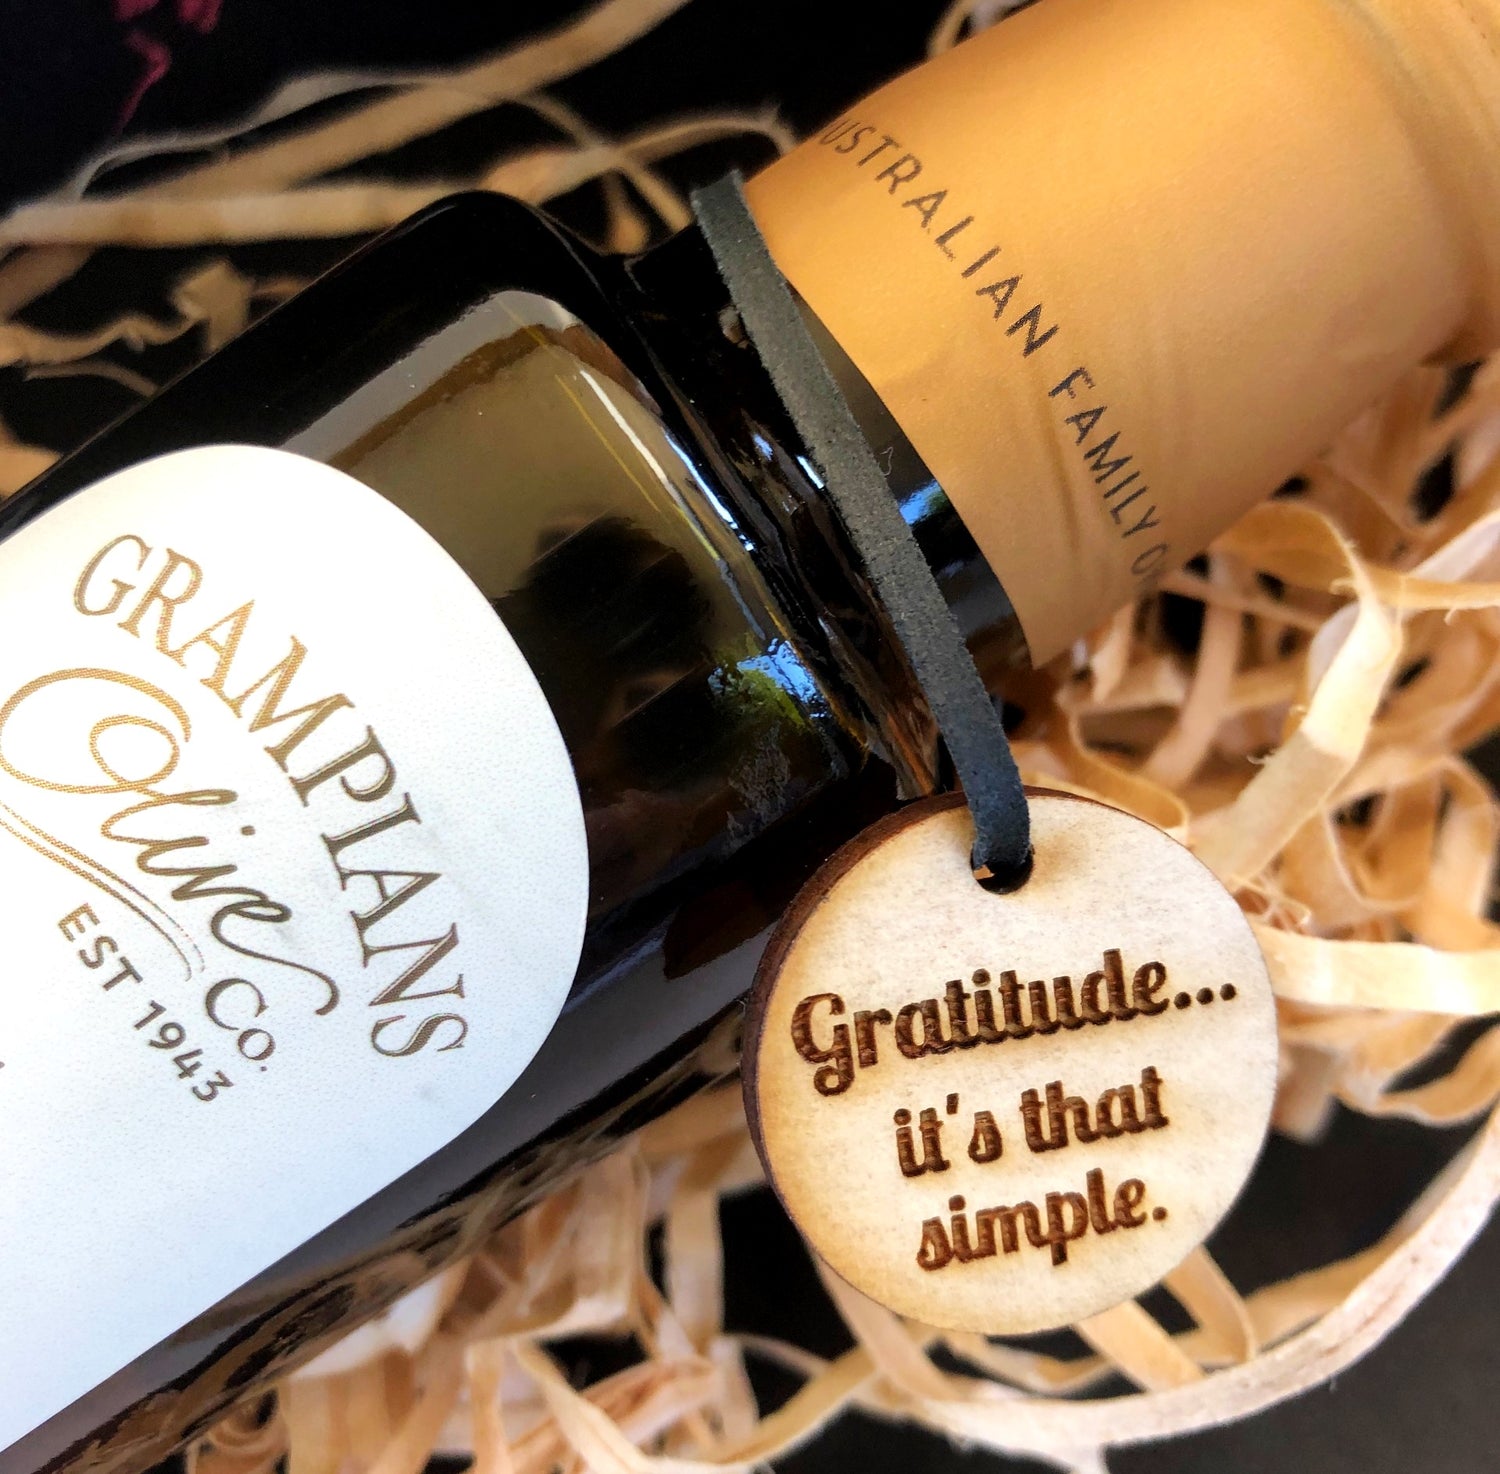 Laser engraved Timber swing tag with quote "Gratitude... it's that simple!" hanging on the neck of a bottle of infused oil to display your brand on your gifts.